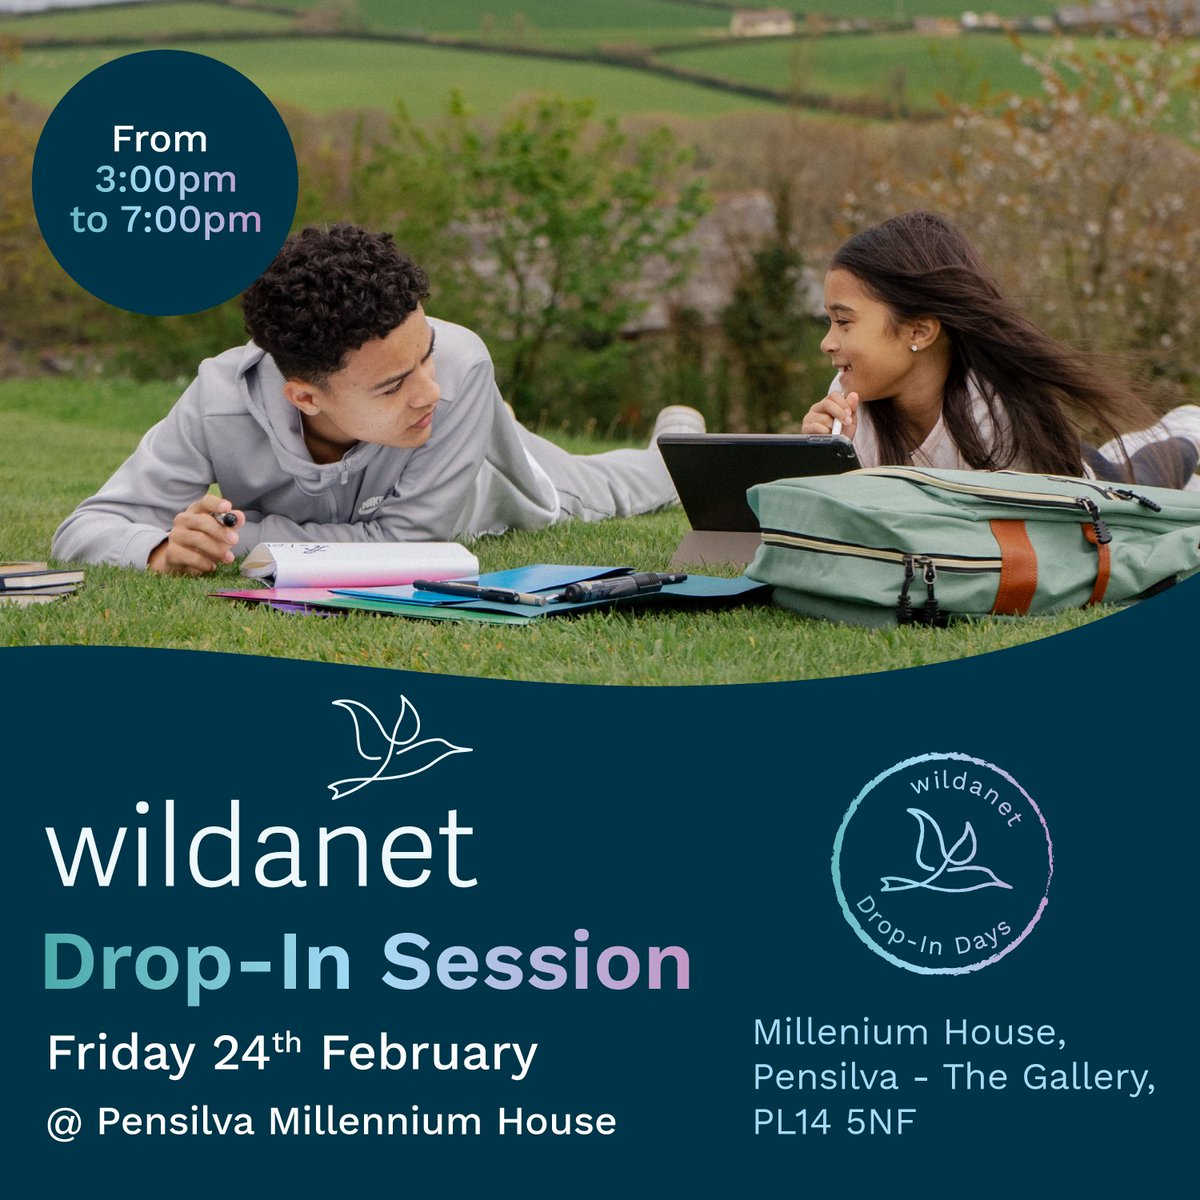 The Wildanet team will be in Pensilva this Friday 24th, for a drop-in session from 3pm - 7pm at Millennium House. Find out more about the benefits of Wildanet’s high-speed, full-fibre broadband network & the team will be on-hand to answer any of your questions.